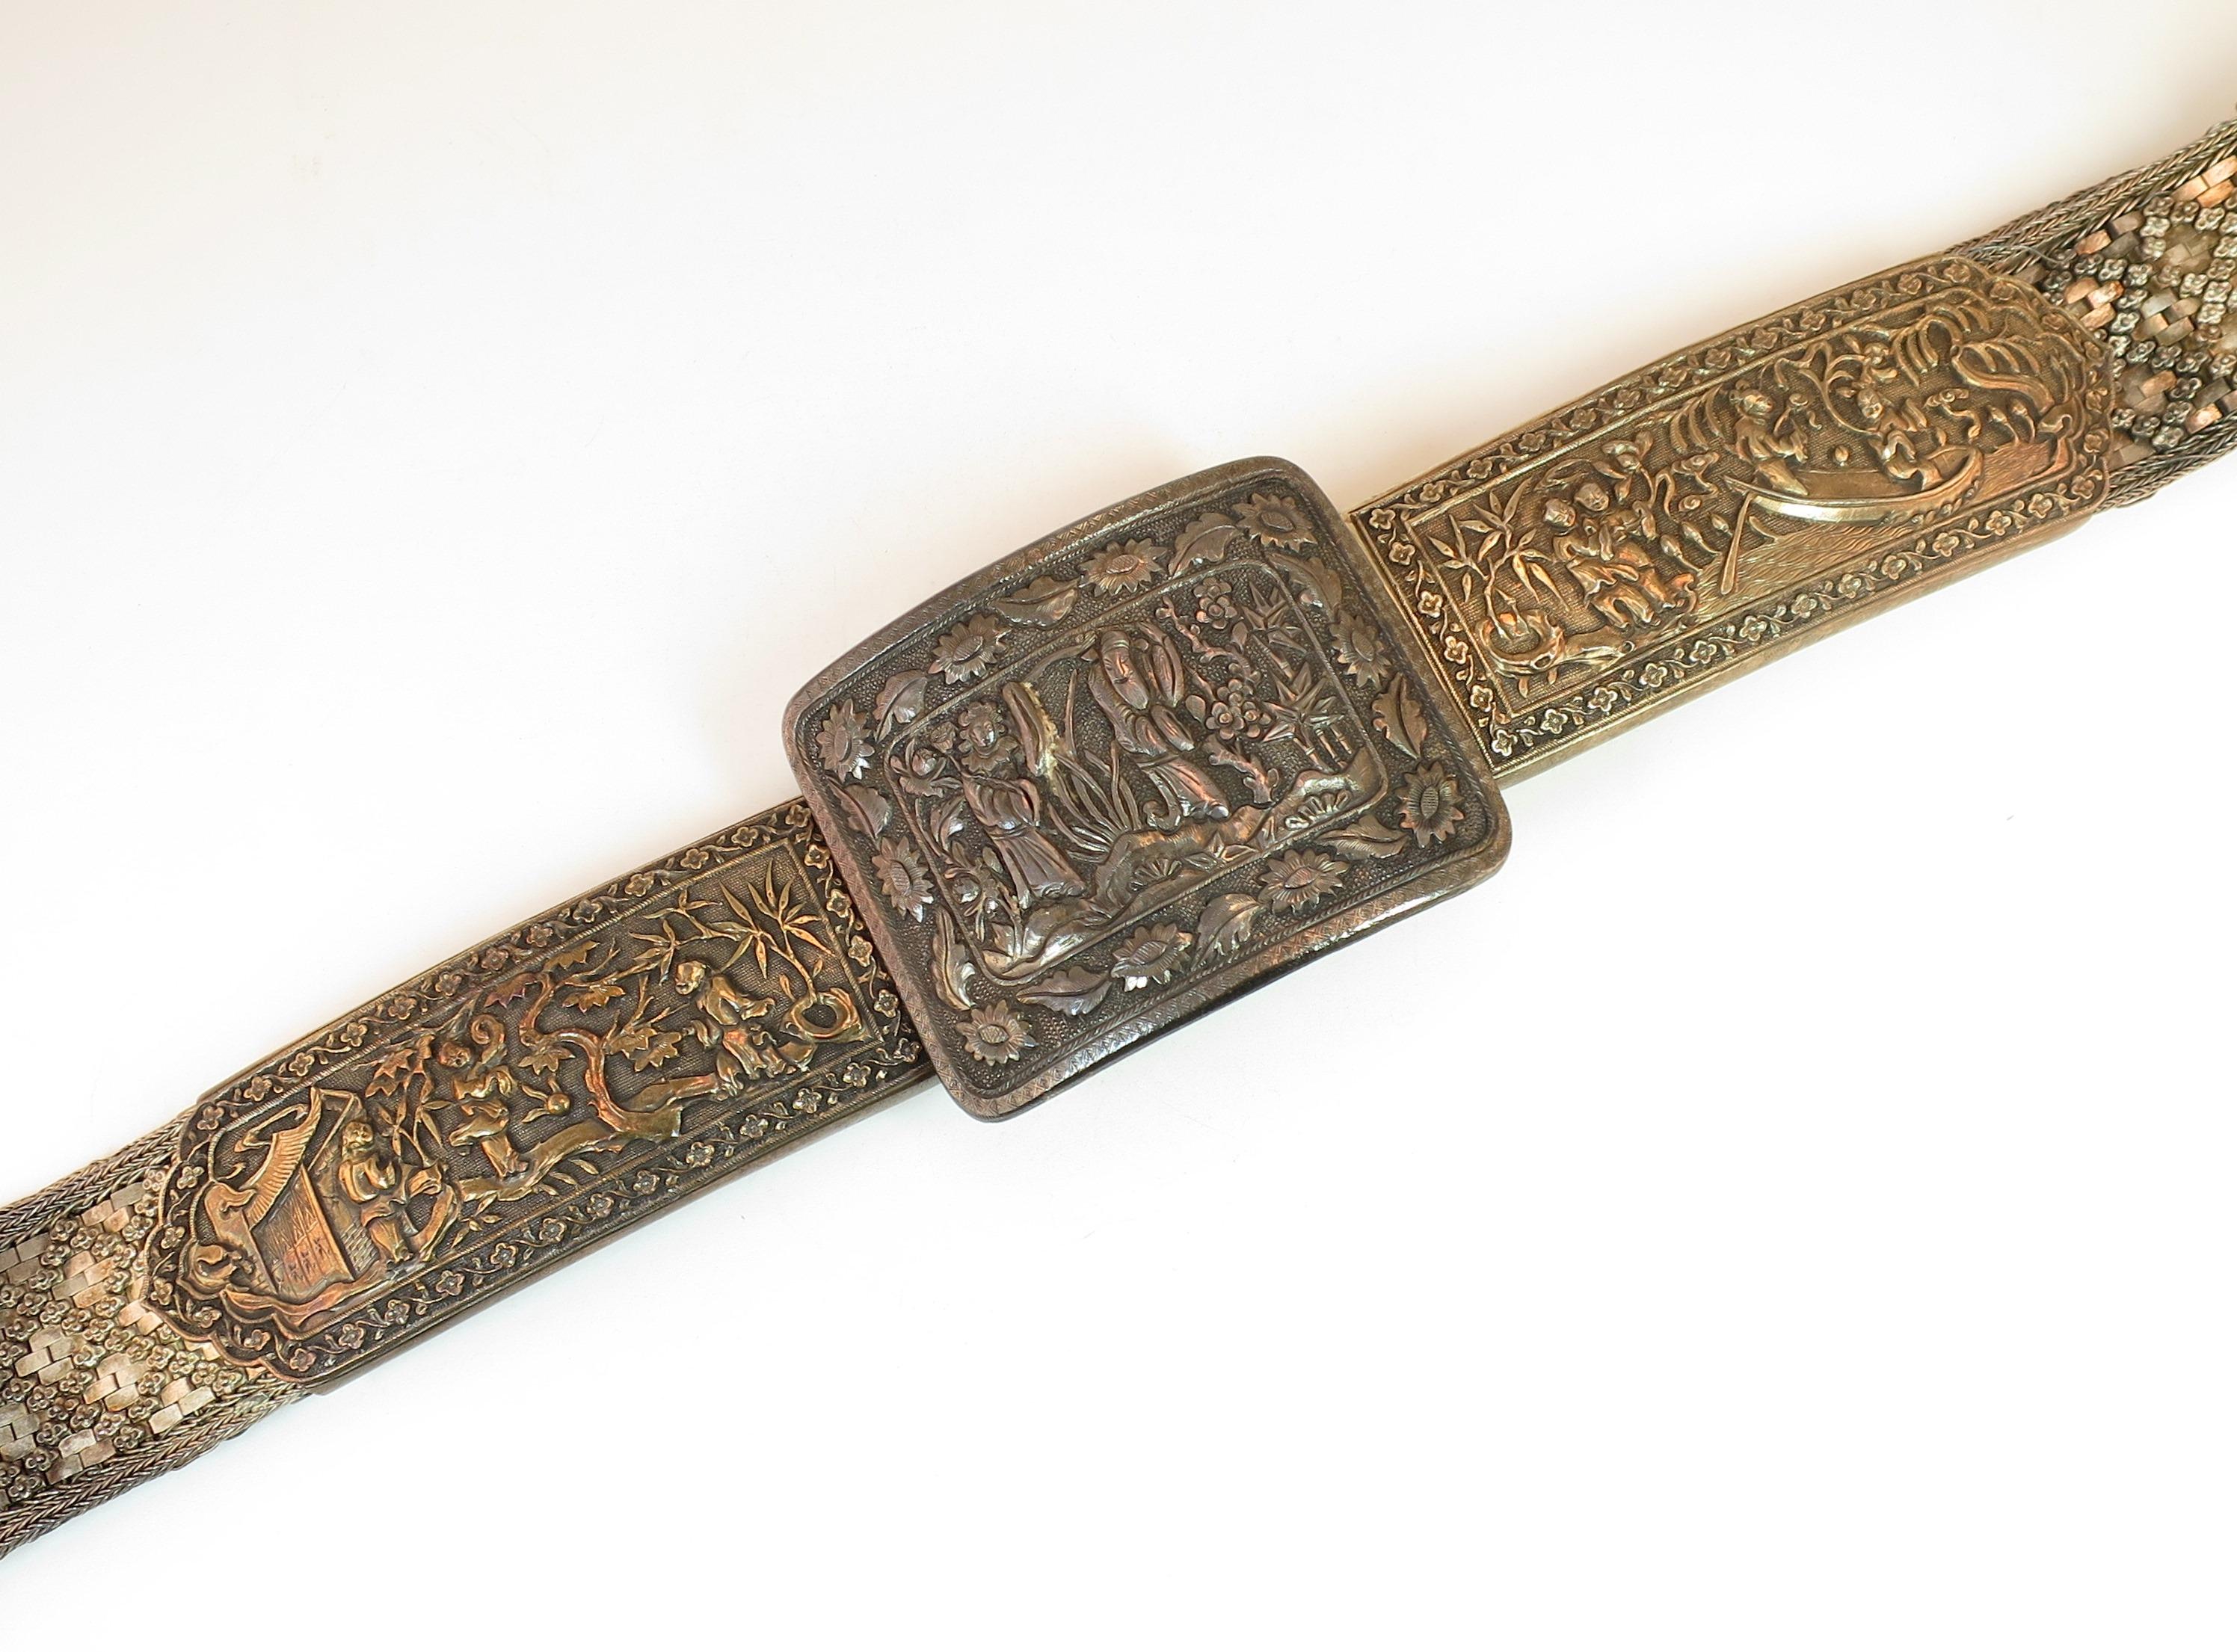 Offered here is an early 19th century Asian silver belt of tightly-woven flat dense geometric mesh embellished with a crisscross design of tiny floral studs. The large rectangular curved buckle is flanked by two large gold-washed elongated panels,